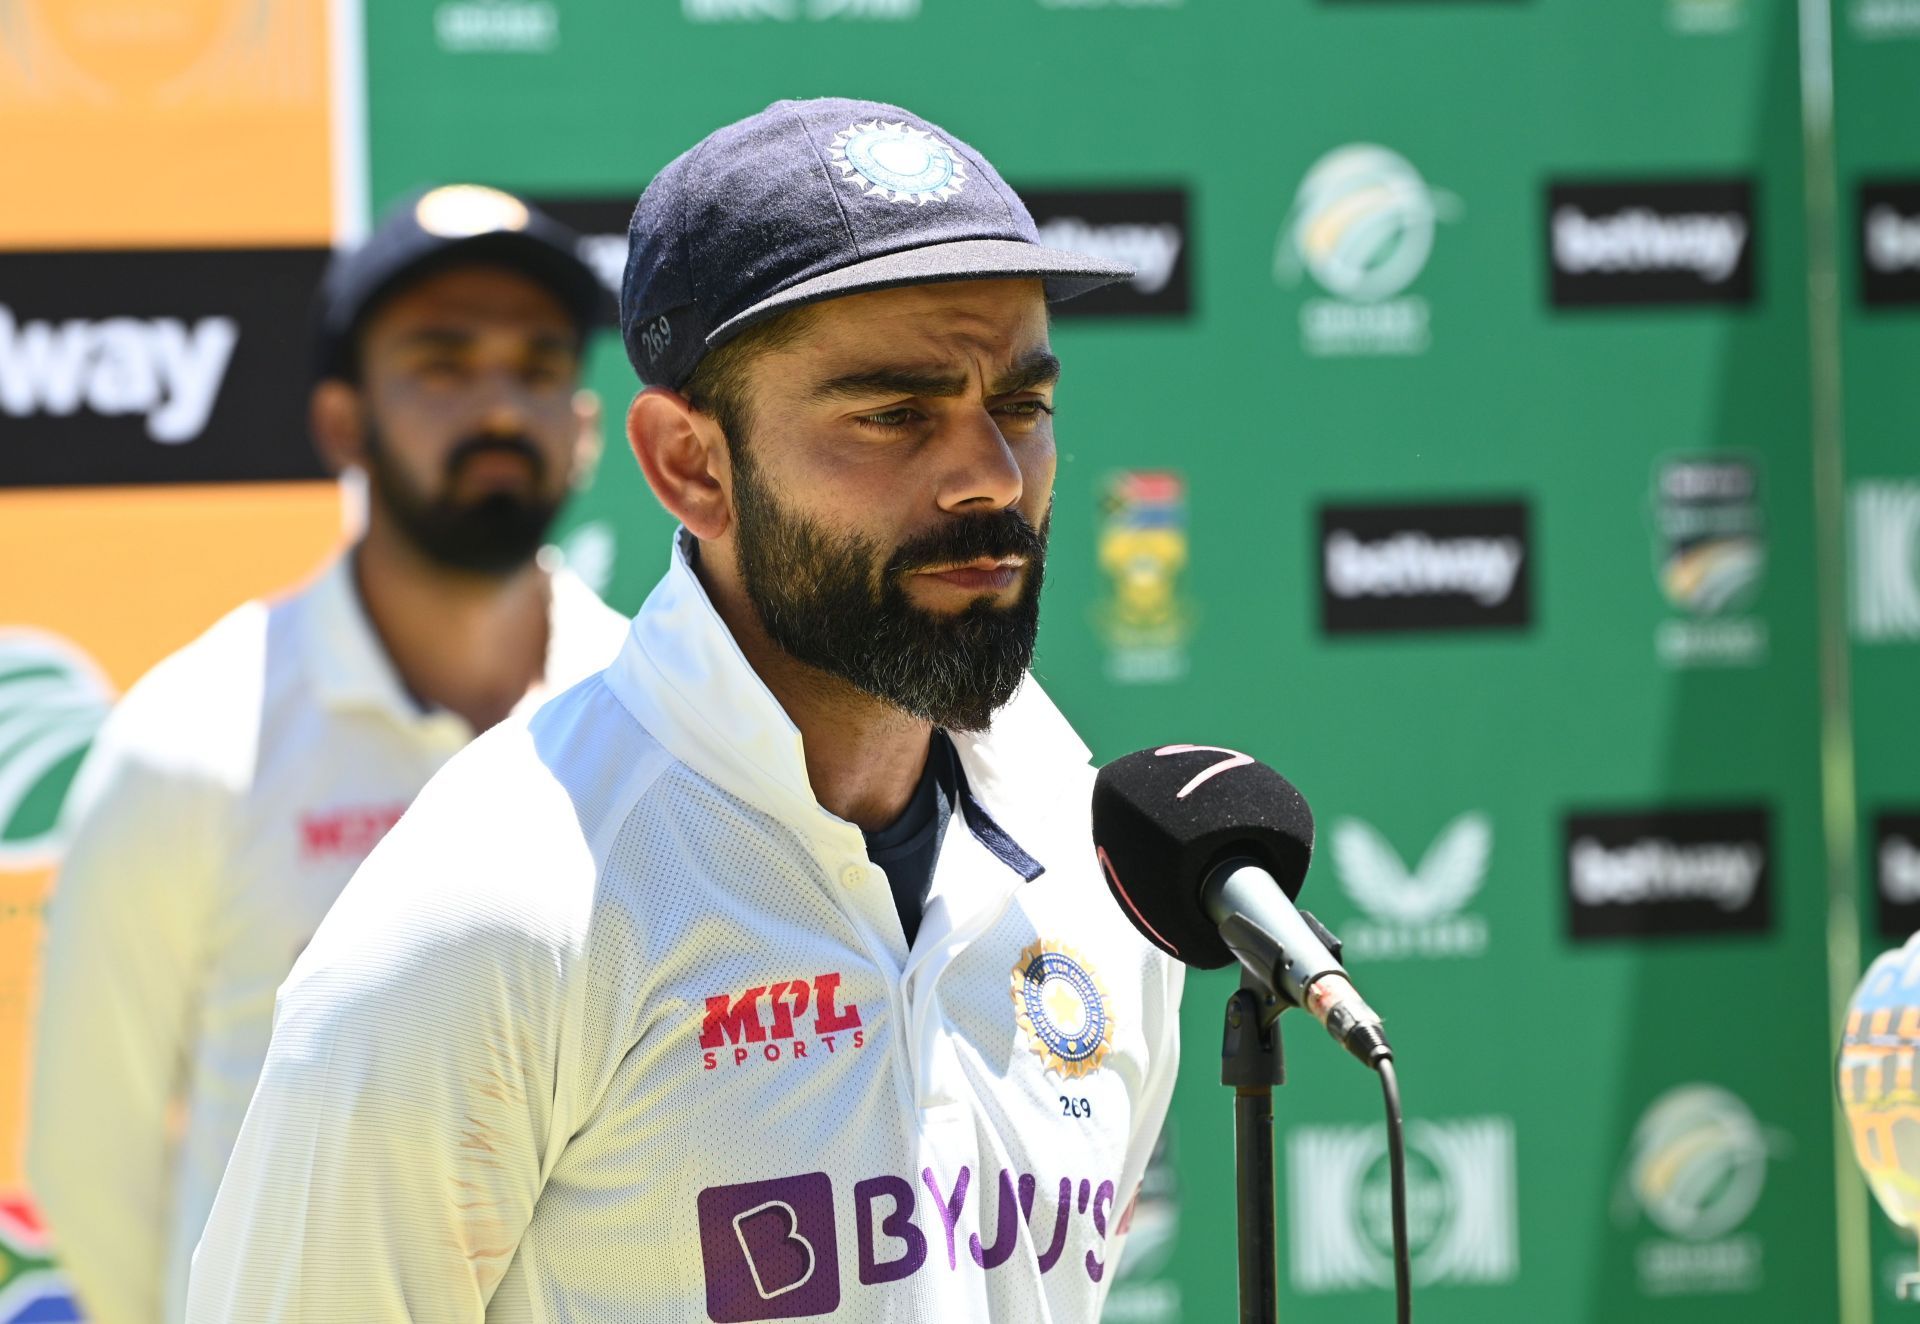 Kohli announced his decision to step down after the series defeat to South Africa